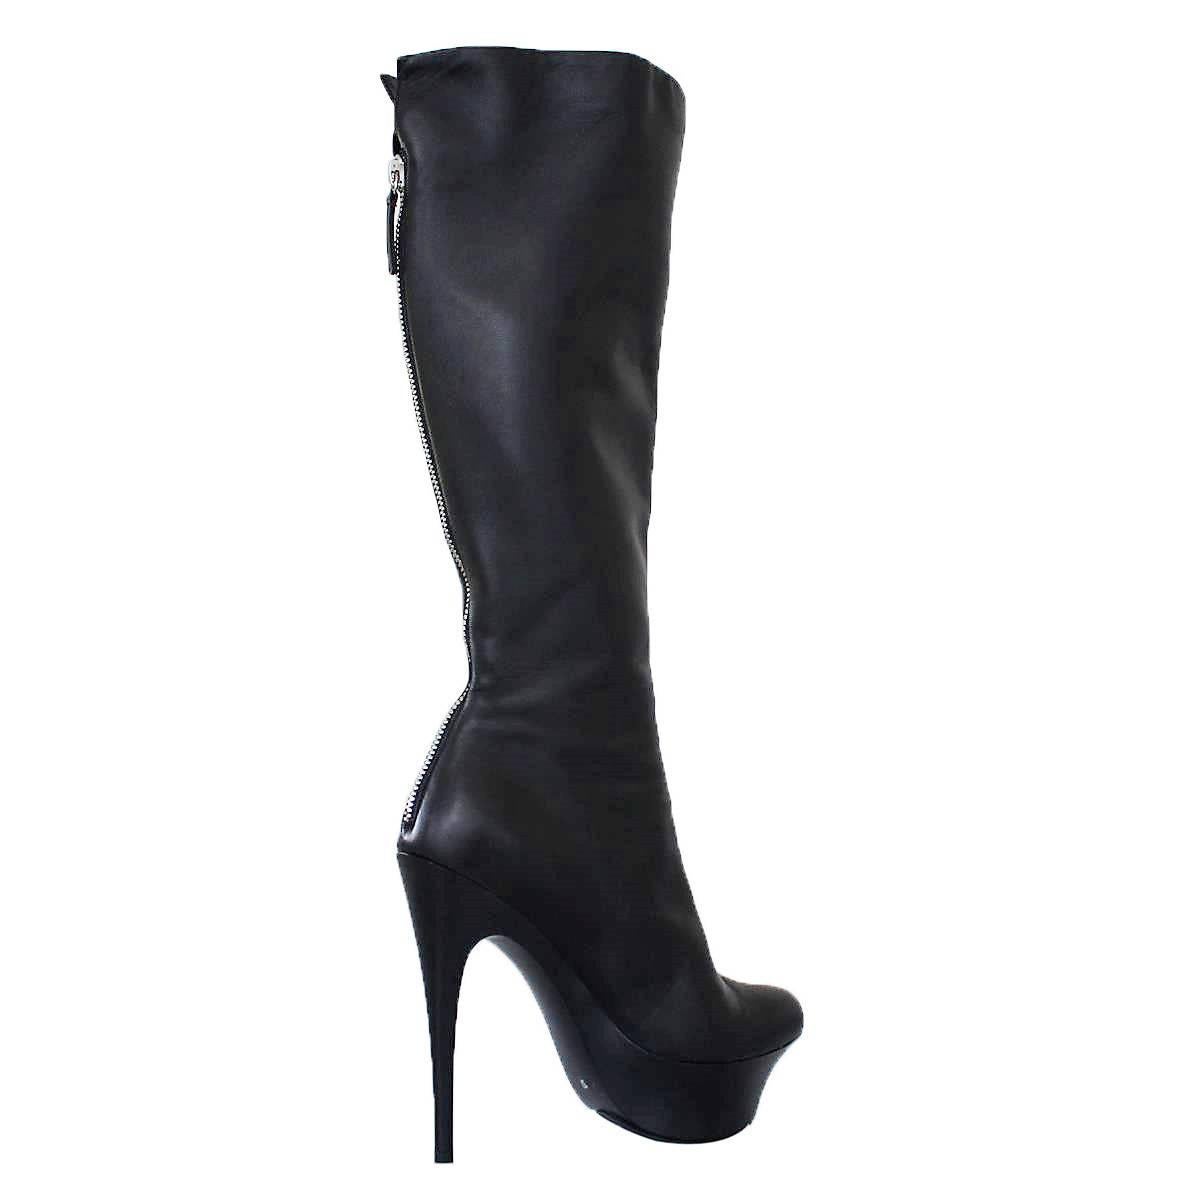 Fantastic Giuseppe Zanotti Design boots
Leather
Black color
Back zipper
Heel height cm 14 (5.5 inches)
Plateau cm 4 (1.57 inches)
Original price € 1300
Used once !
Made in Italy Worldwide express shipping included in the price !